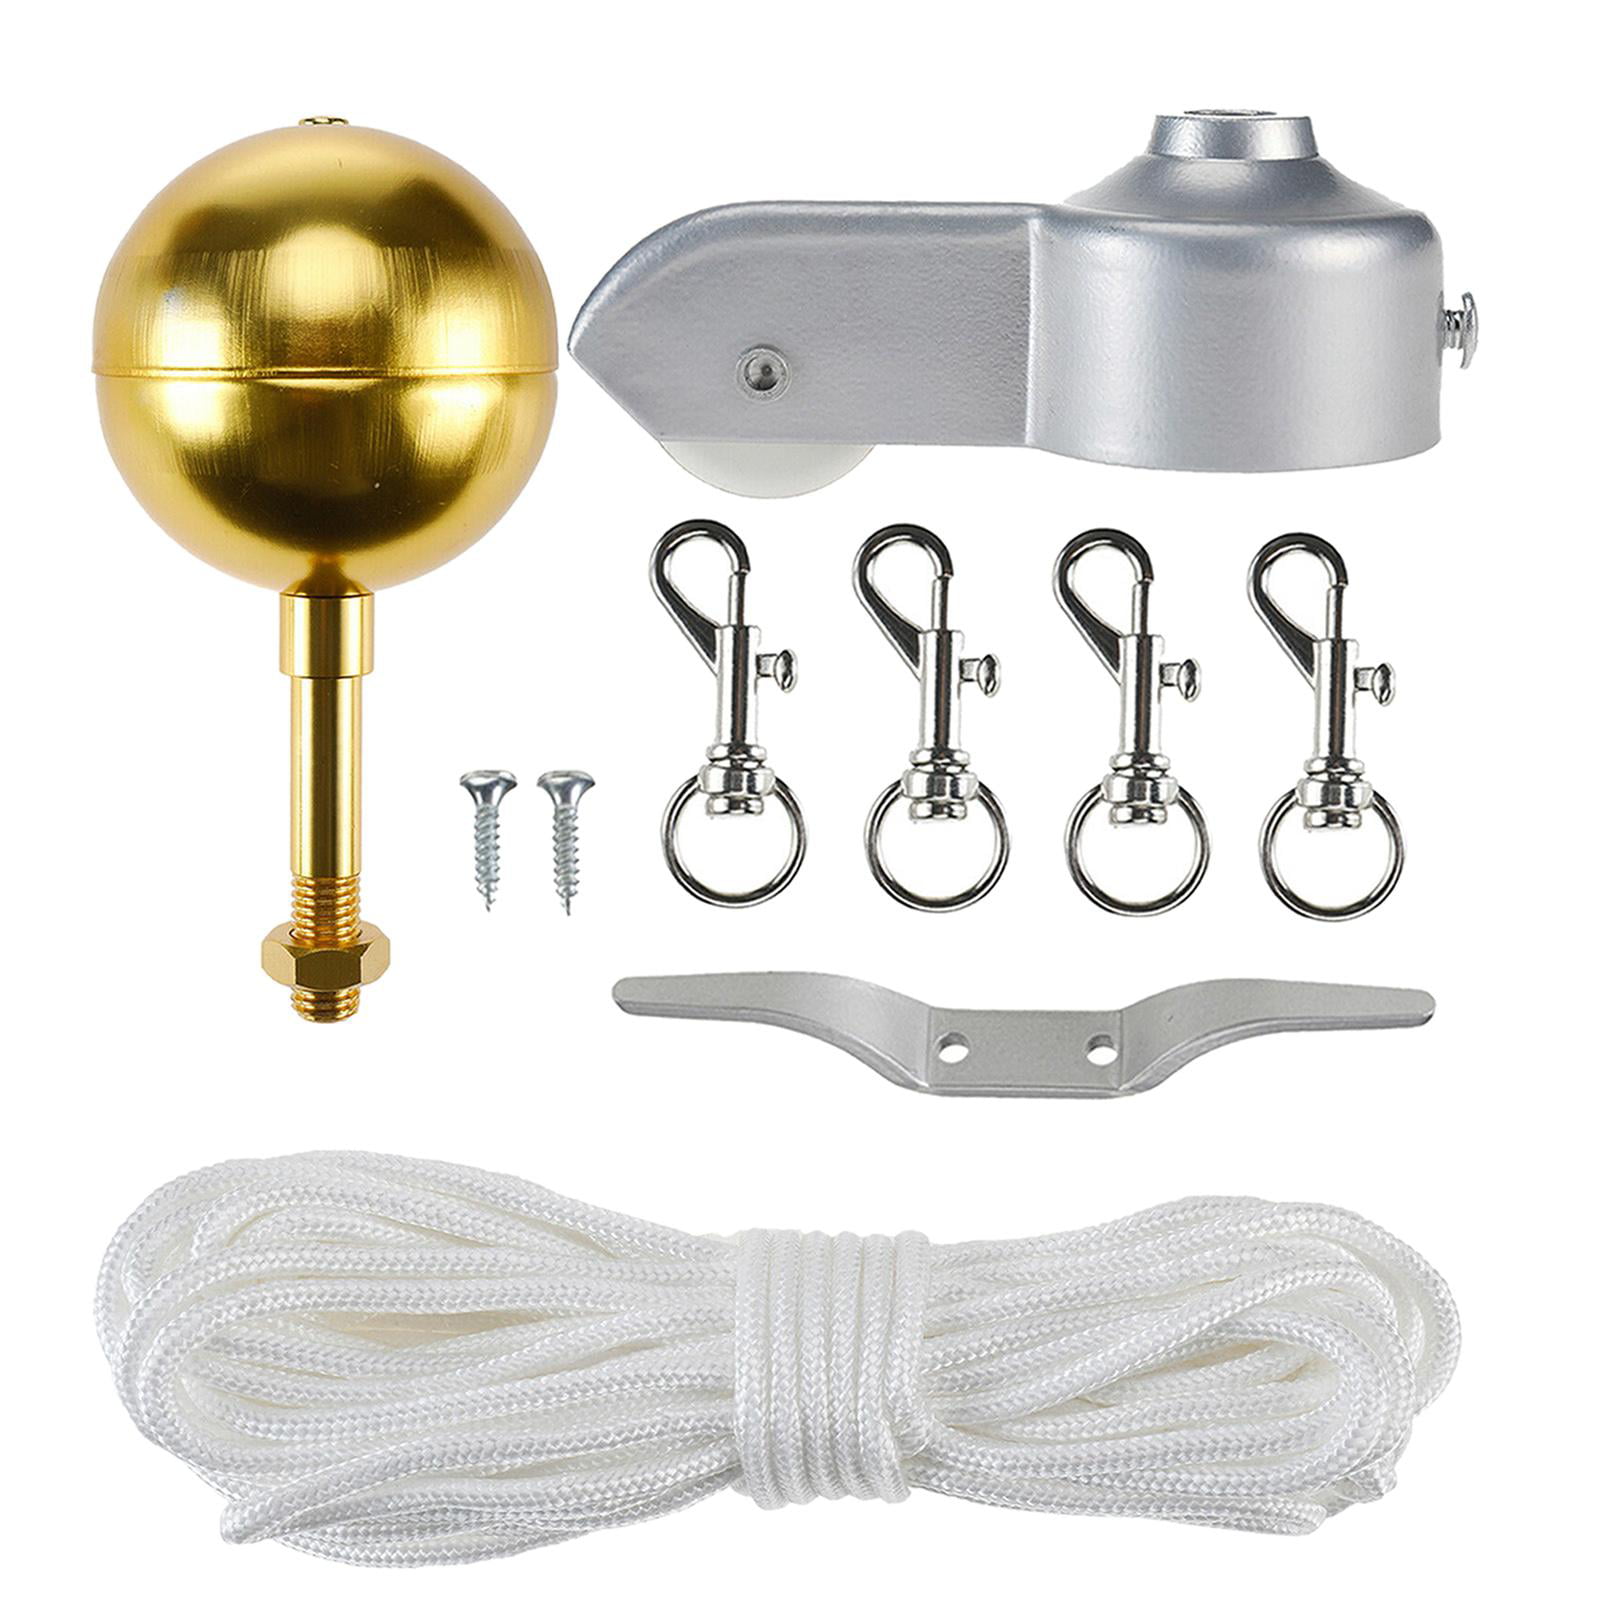 FLAG POLE PARTS REPAIR KIT 2" Diameter Truck Pulley Gold Ball Cleat Clips Rope 